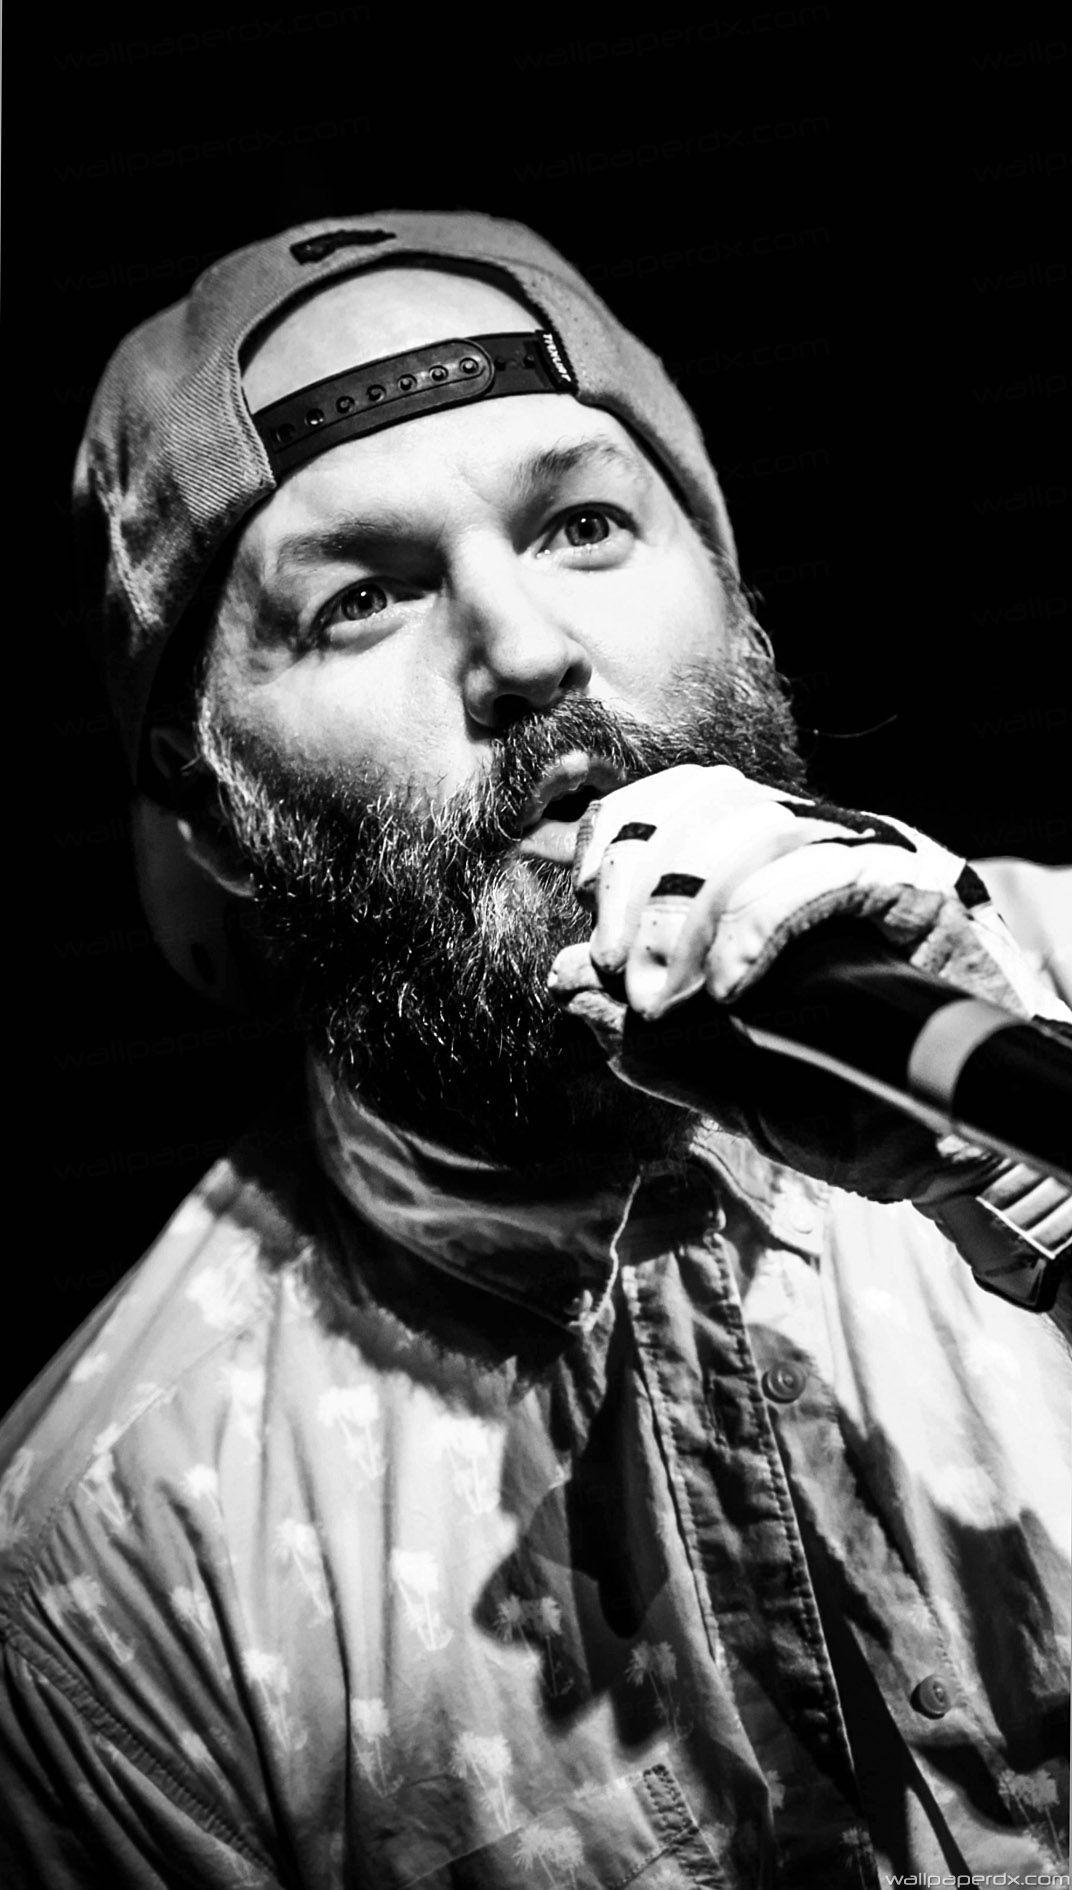 Fred Durst Limp Bizkit Music Rapcore Black And White iphone 6 iphone